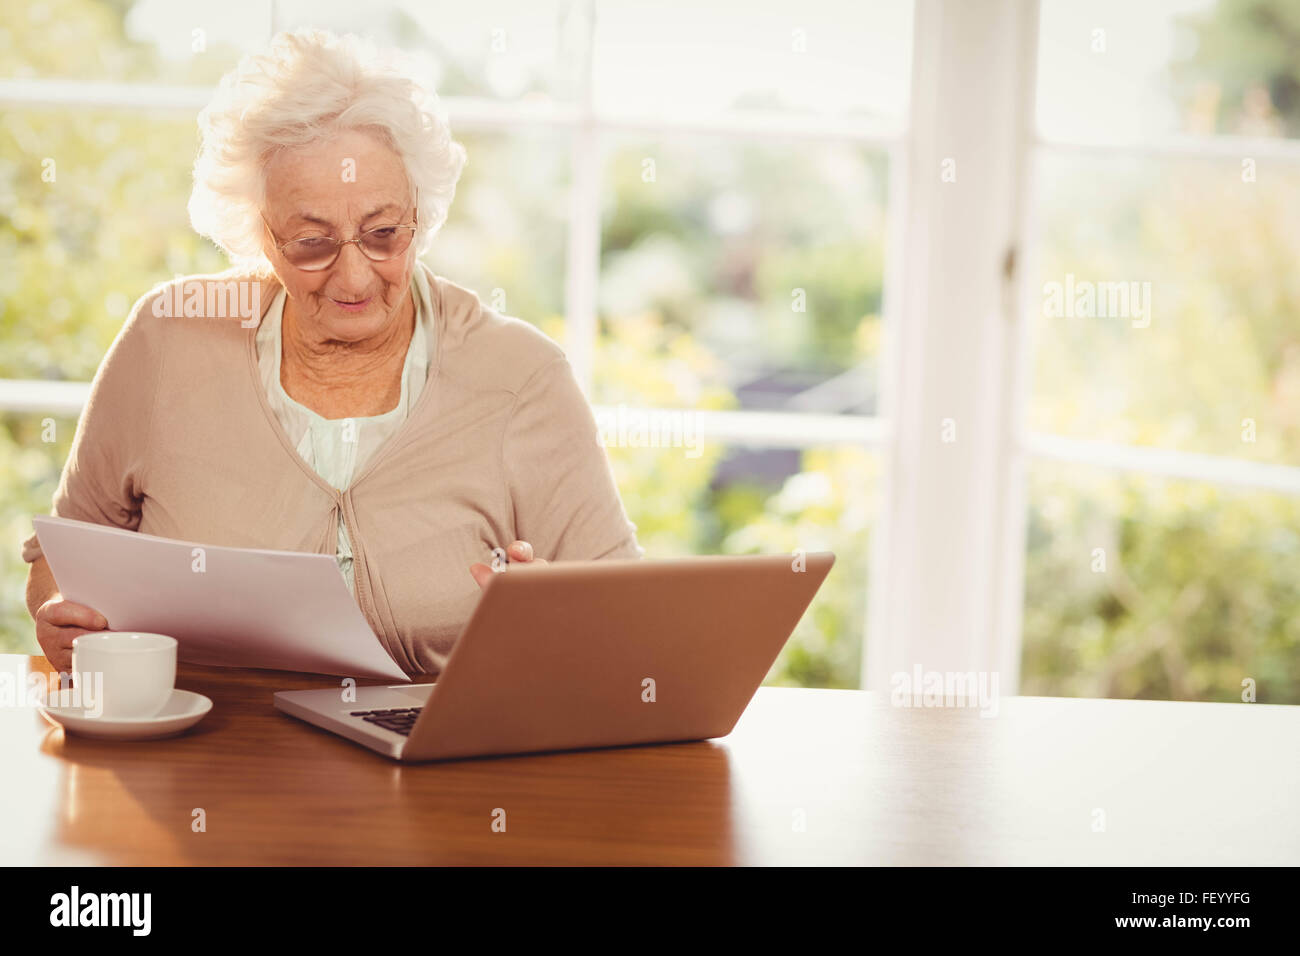 Senior woman dealing with documents while using laptop Stock Photo